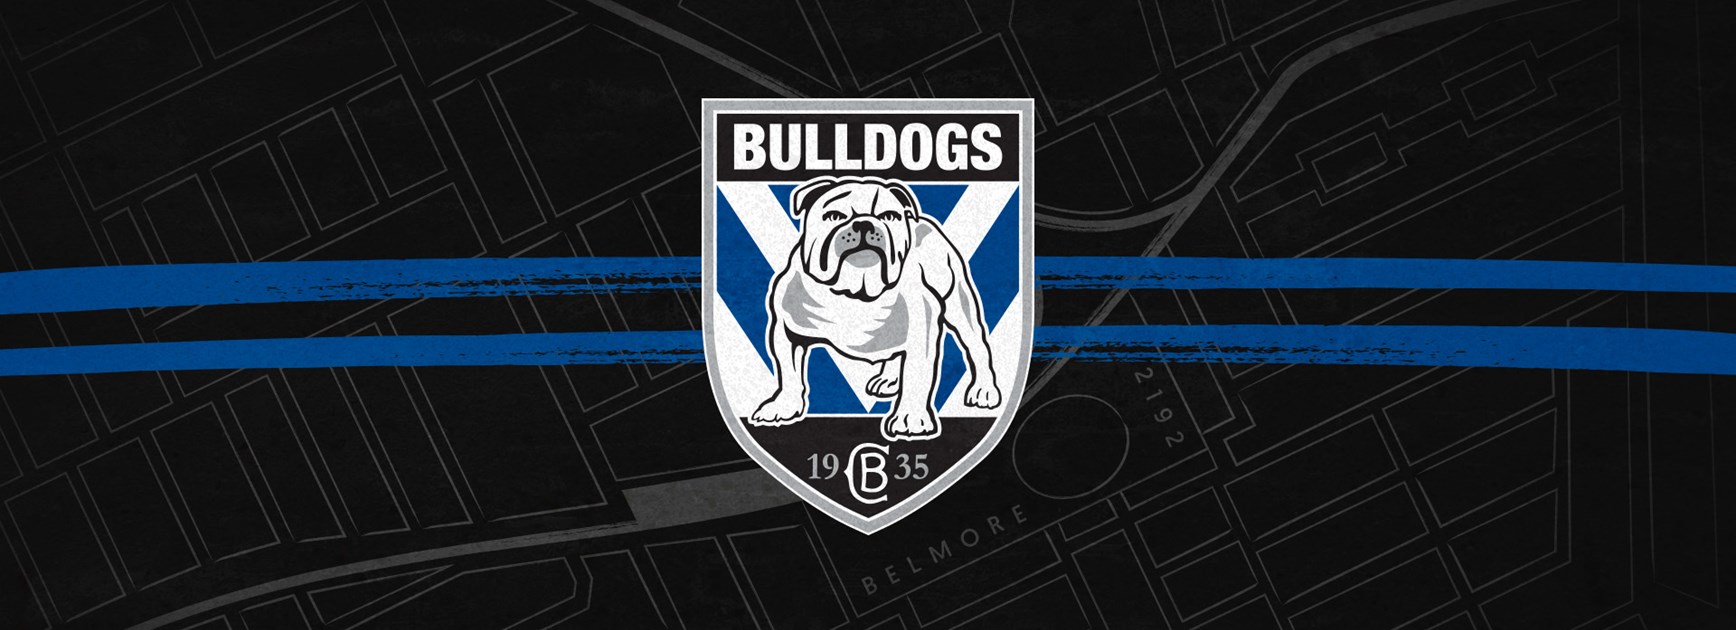 Bulldogs & Canterbury League Club join forces: $50,000 donation for natural disasters relief